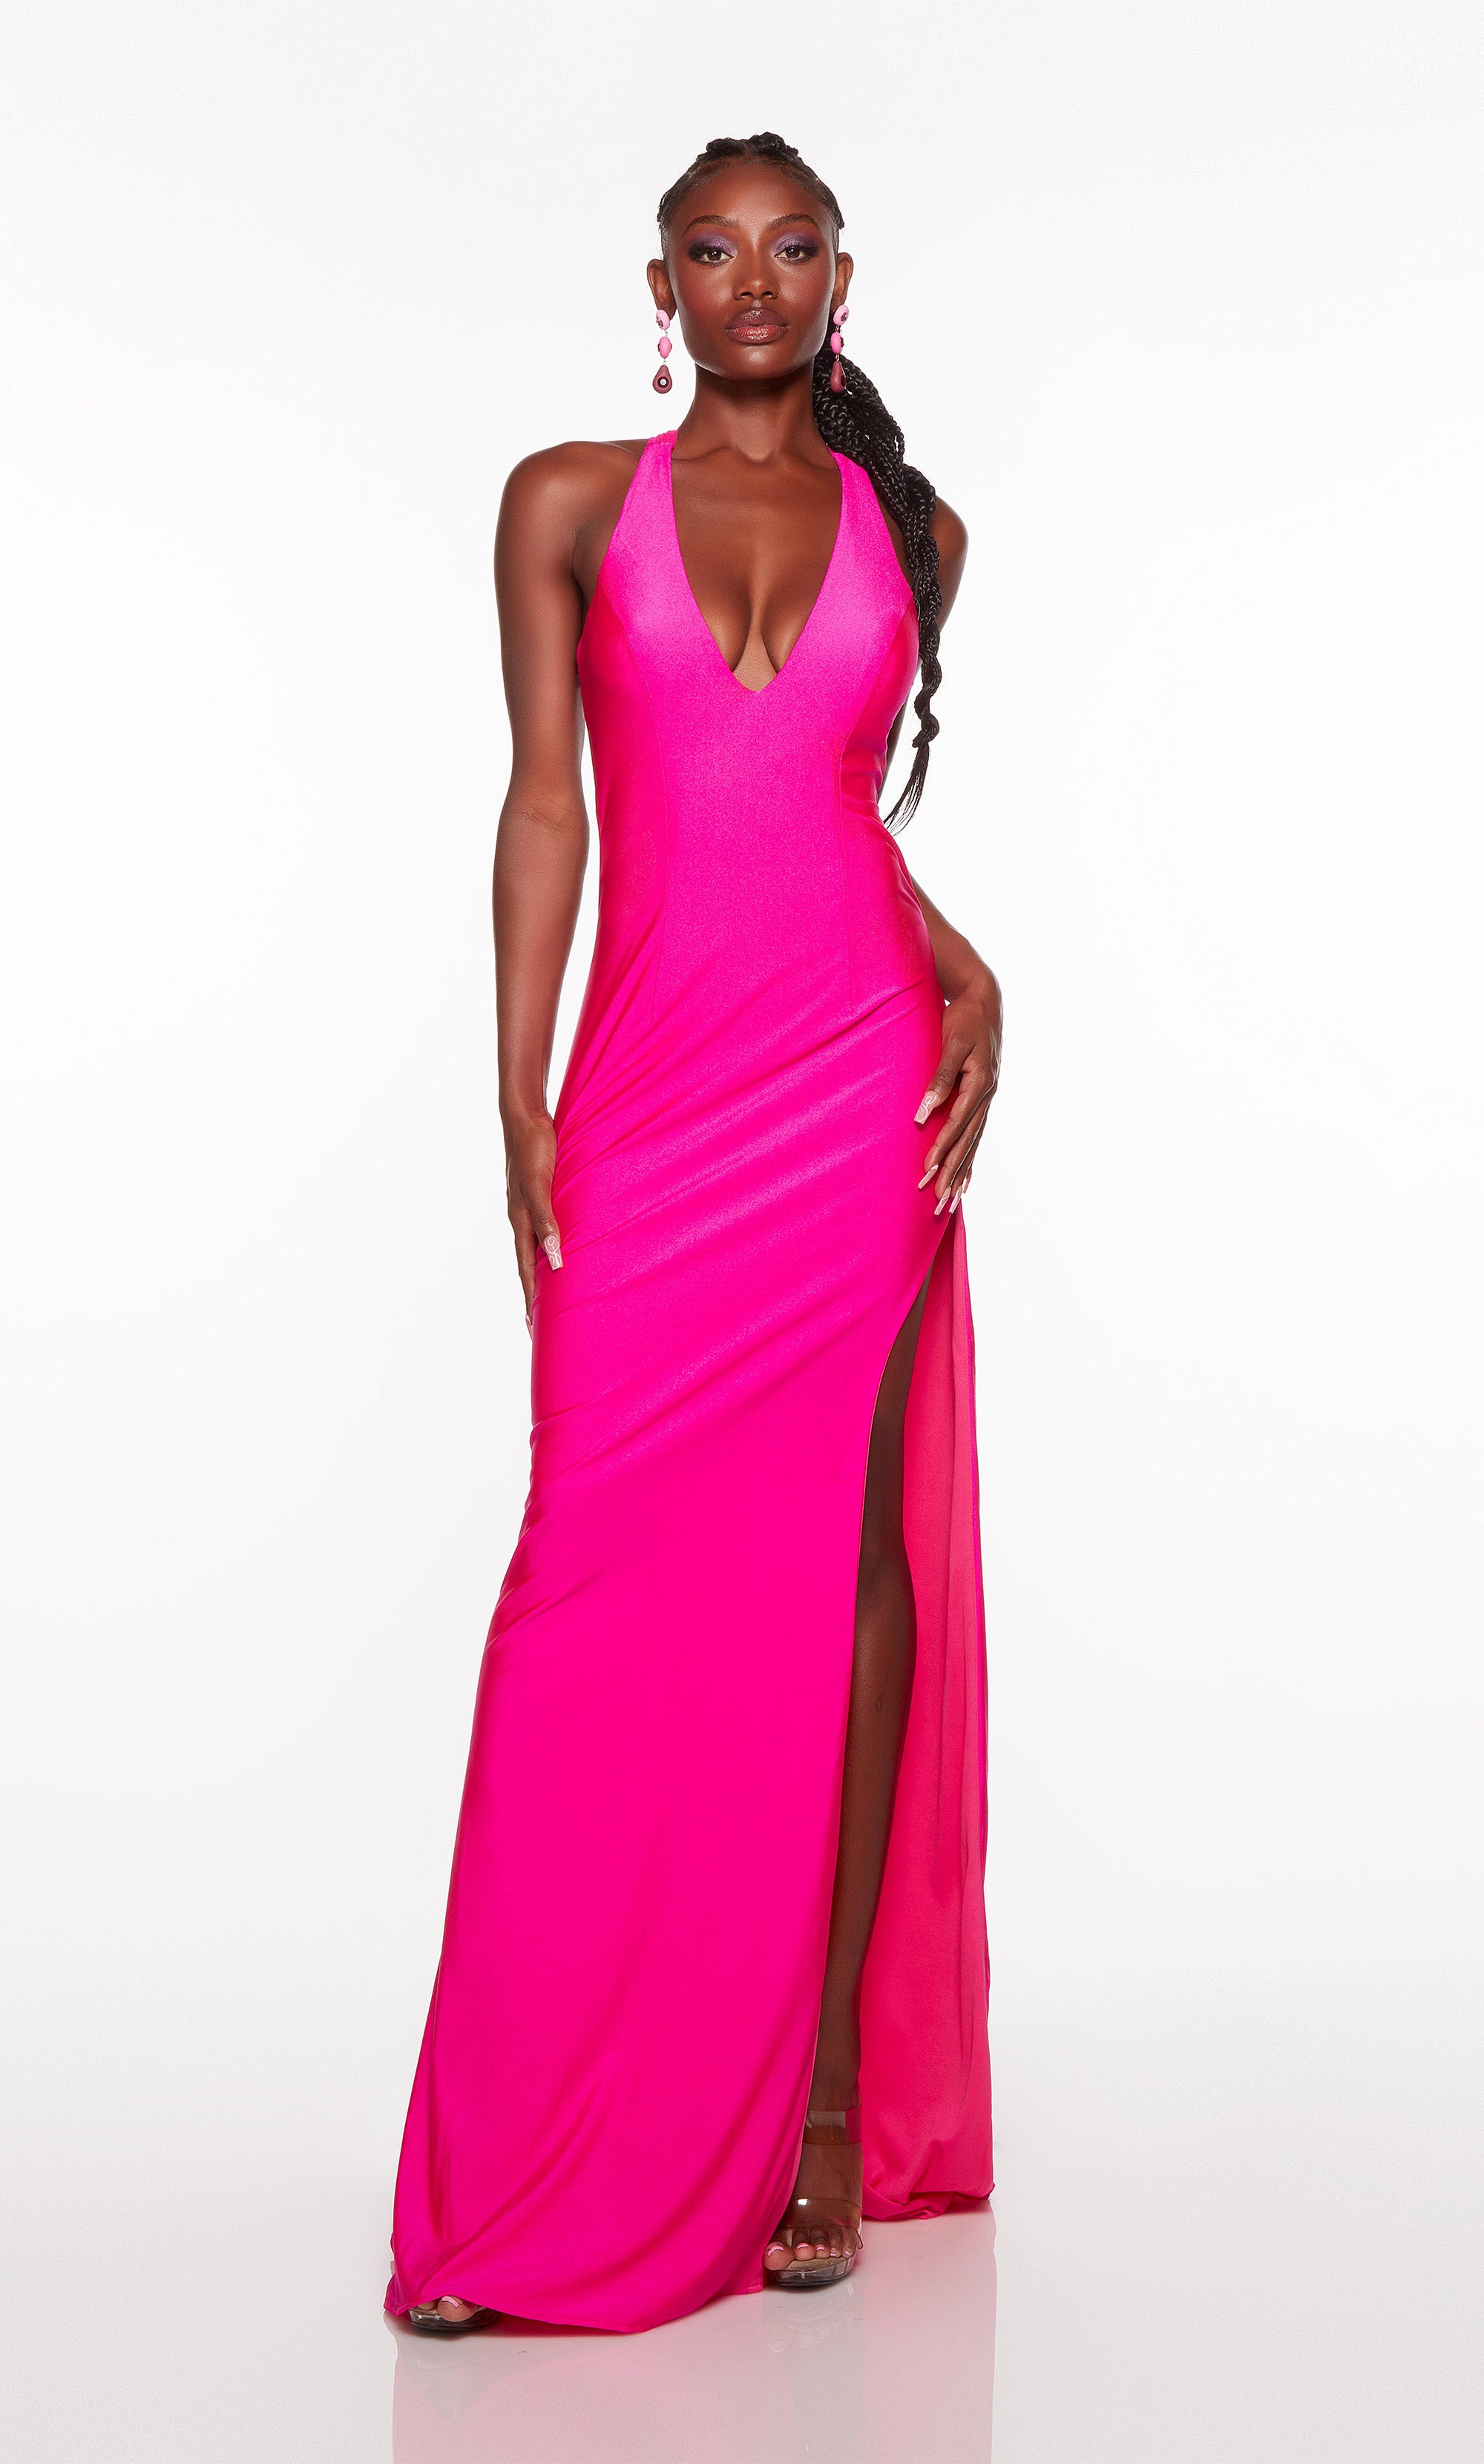 fuchsia gown by saher dia | Fashion gowns, Gorgeous gowns, Beautiful gowns